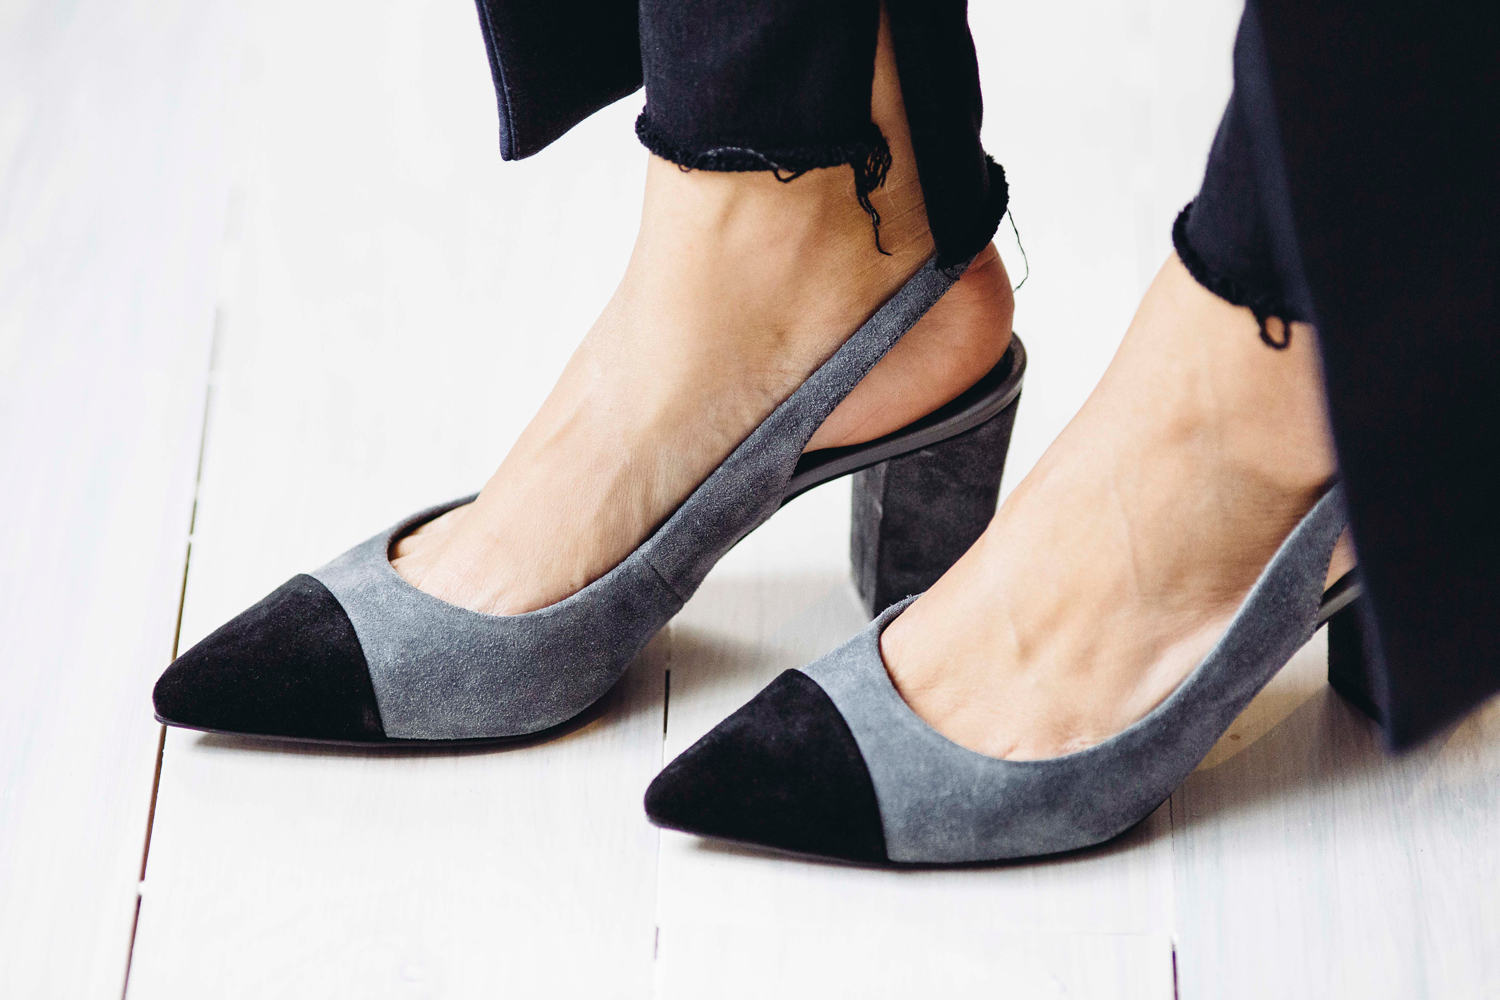 ELEANOR PENDLETON LAUNCHES NEW SHOE COLLECTION - Gritty Pretty